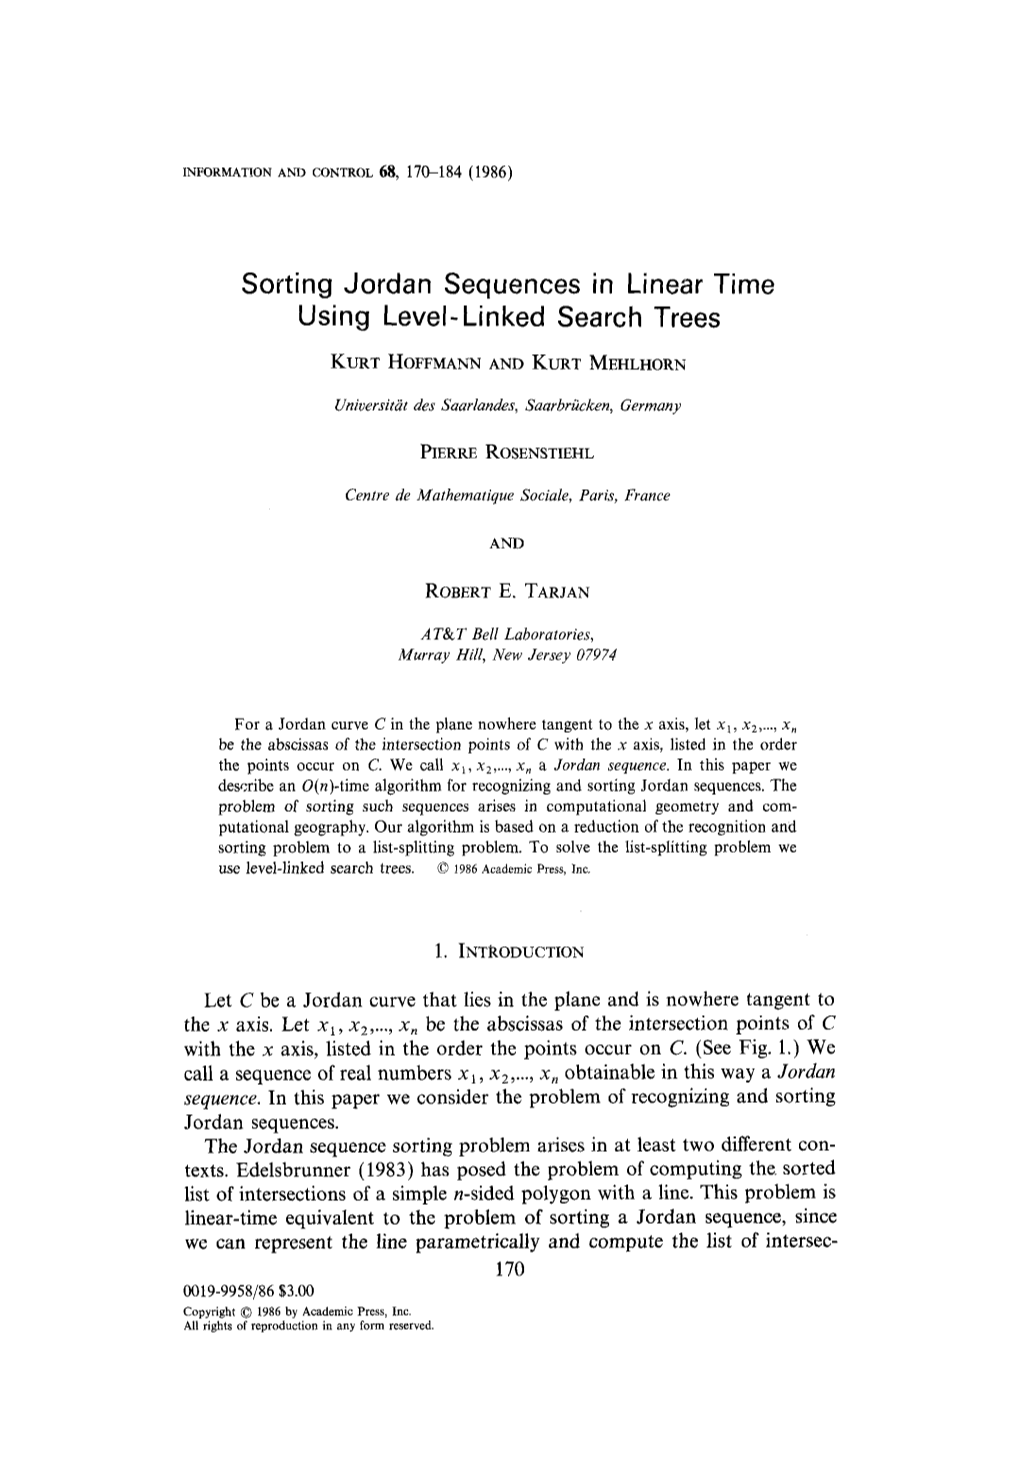 Sorting Jordan Sequences in Linear Time Using Level-Linked Search Trees